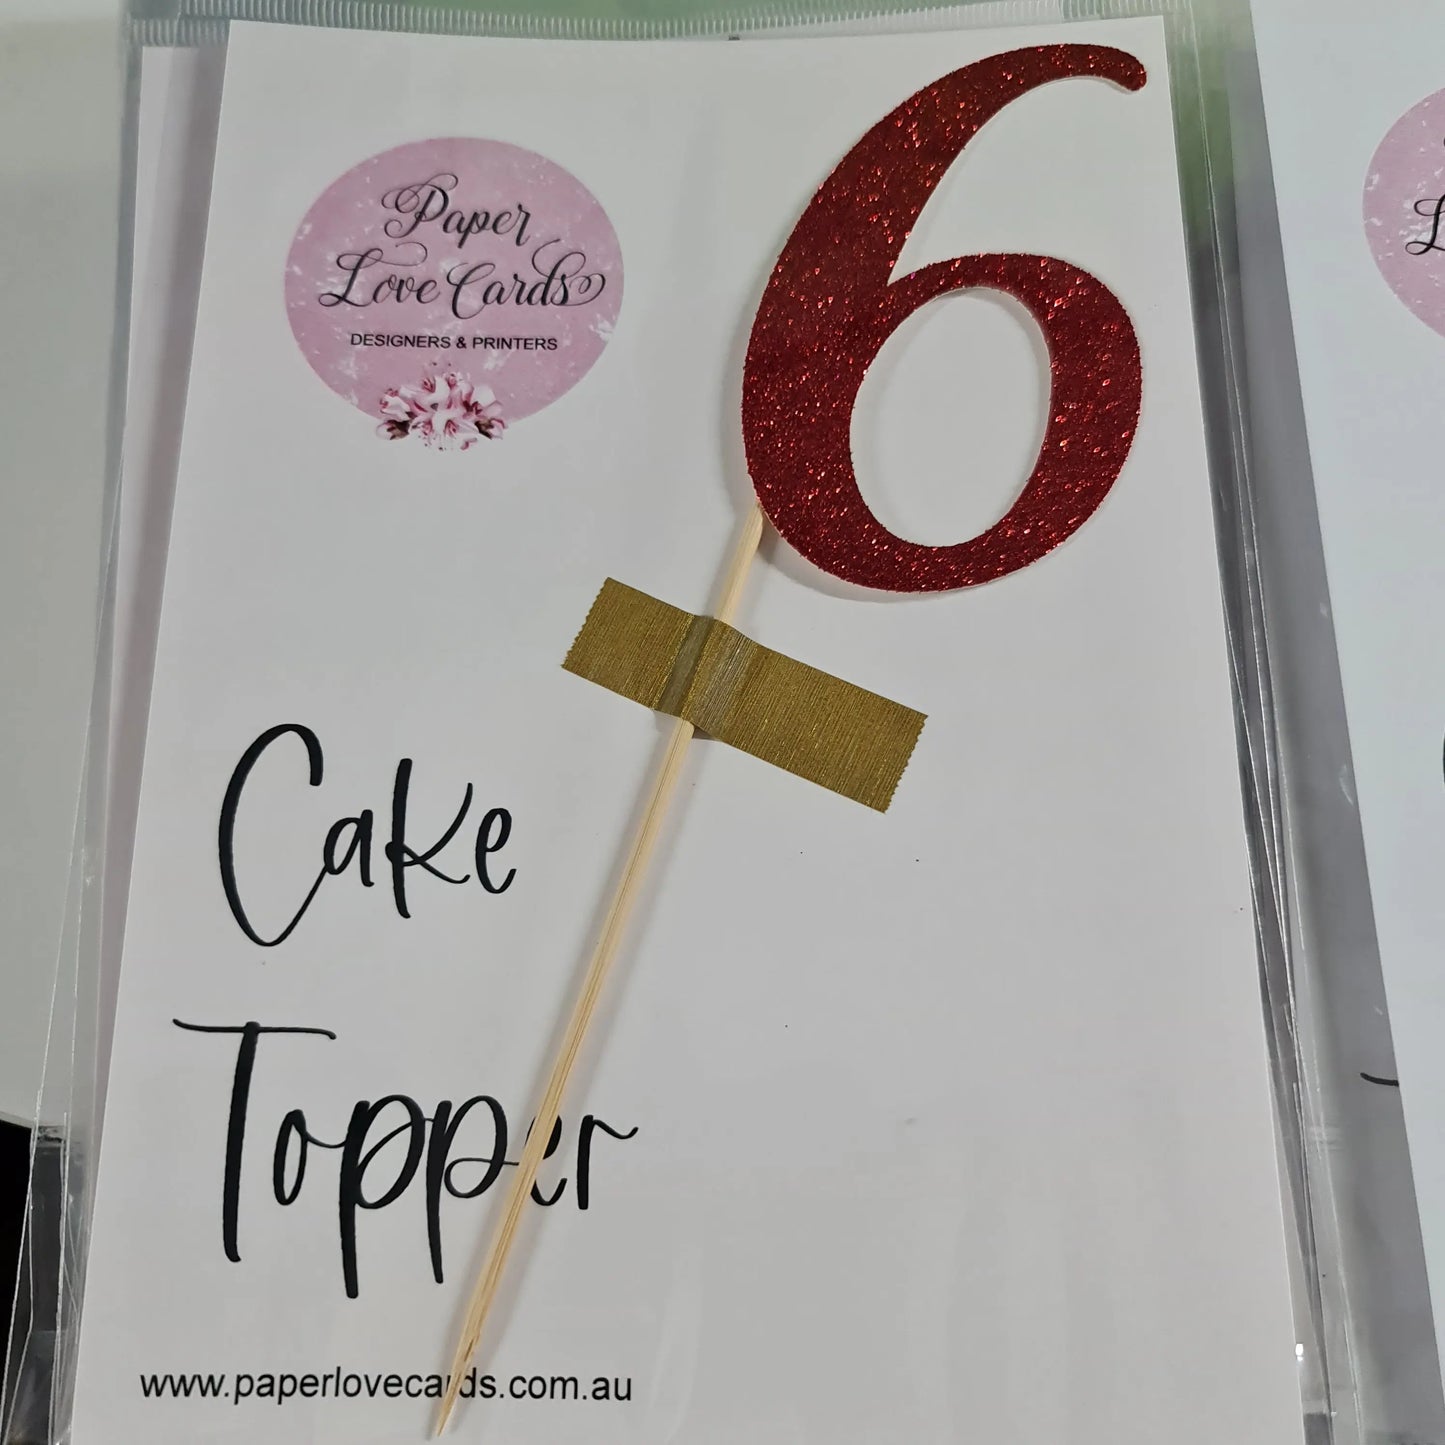 Glitter Age Toppers - Mix and Match Paper Love Cards